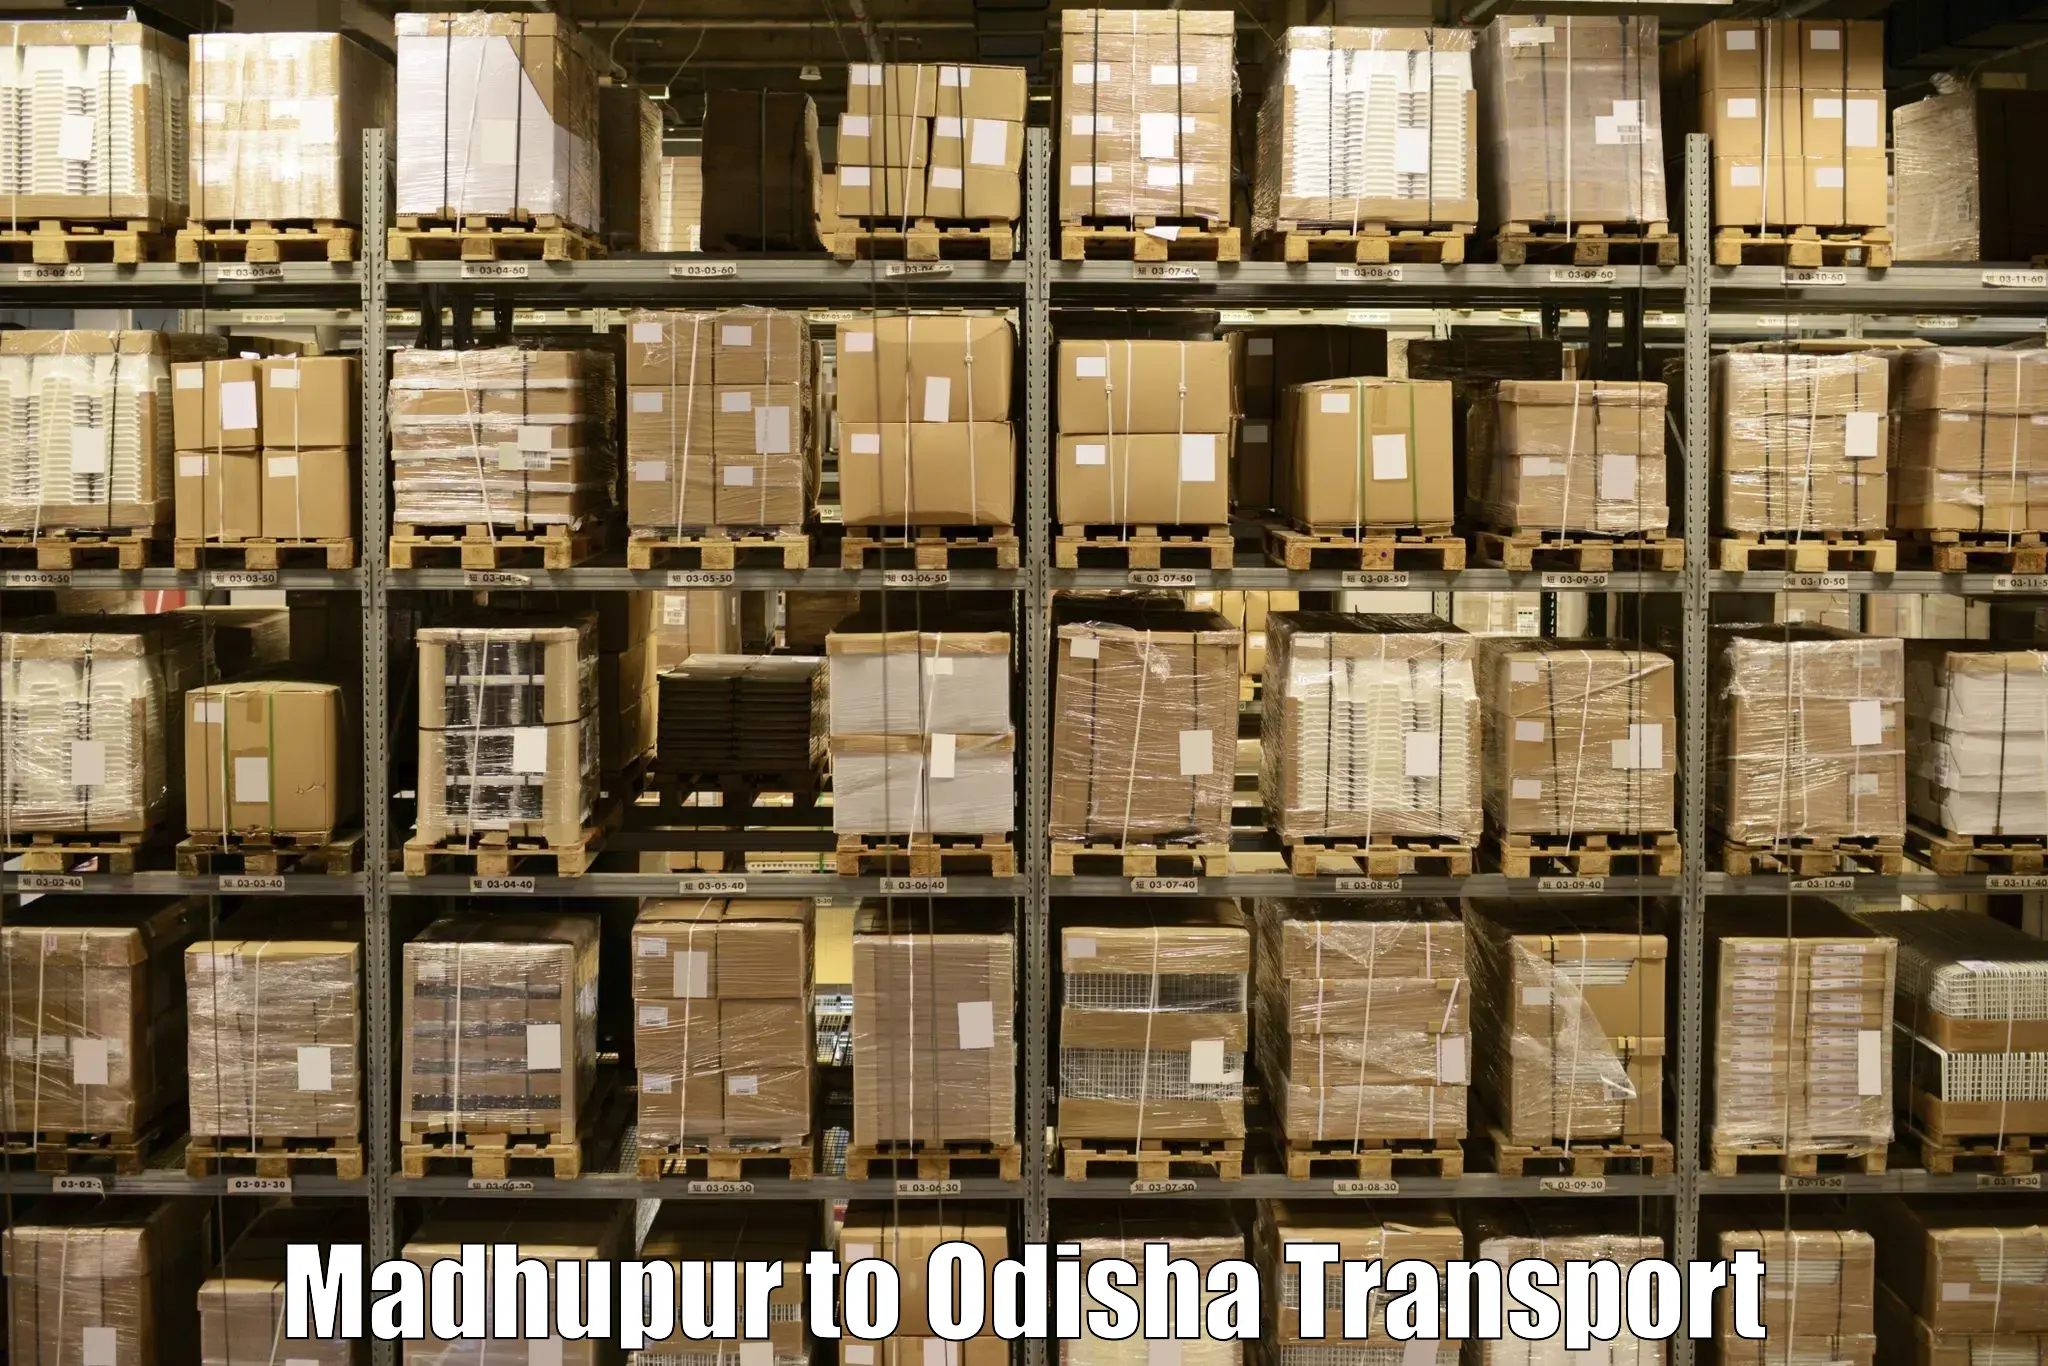 Transport bike from one state to another Madhupur to Chandikhol